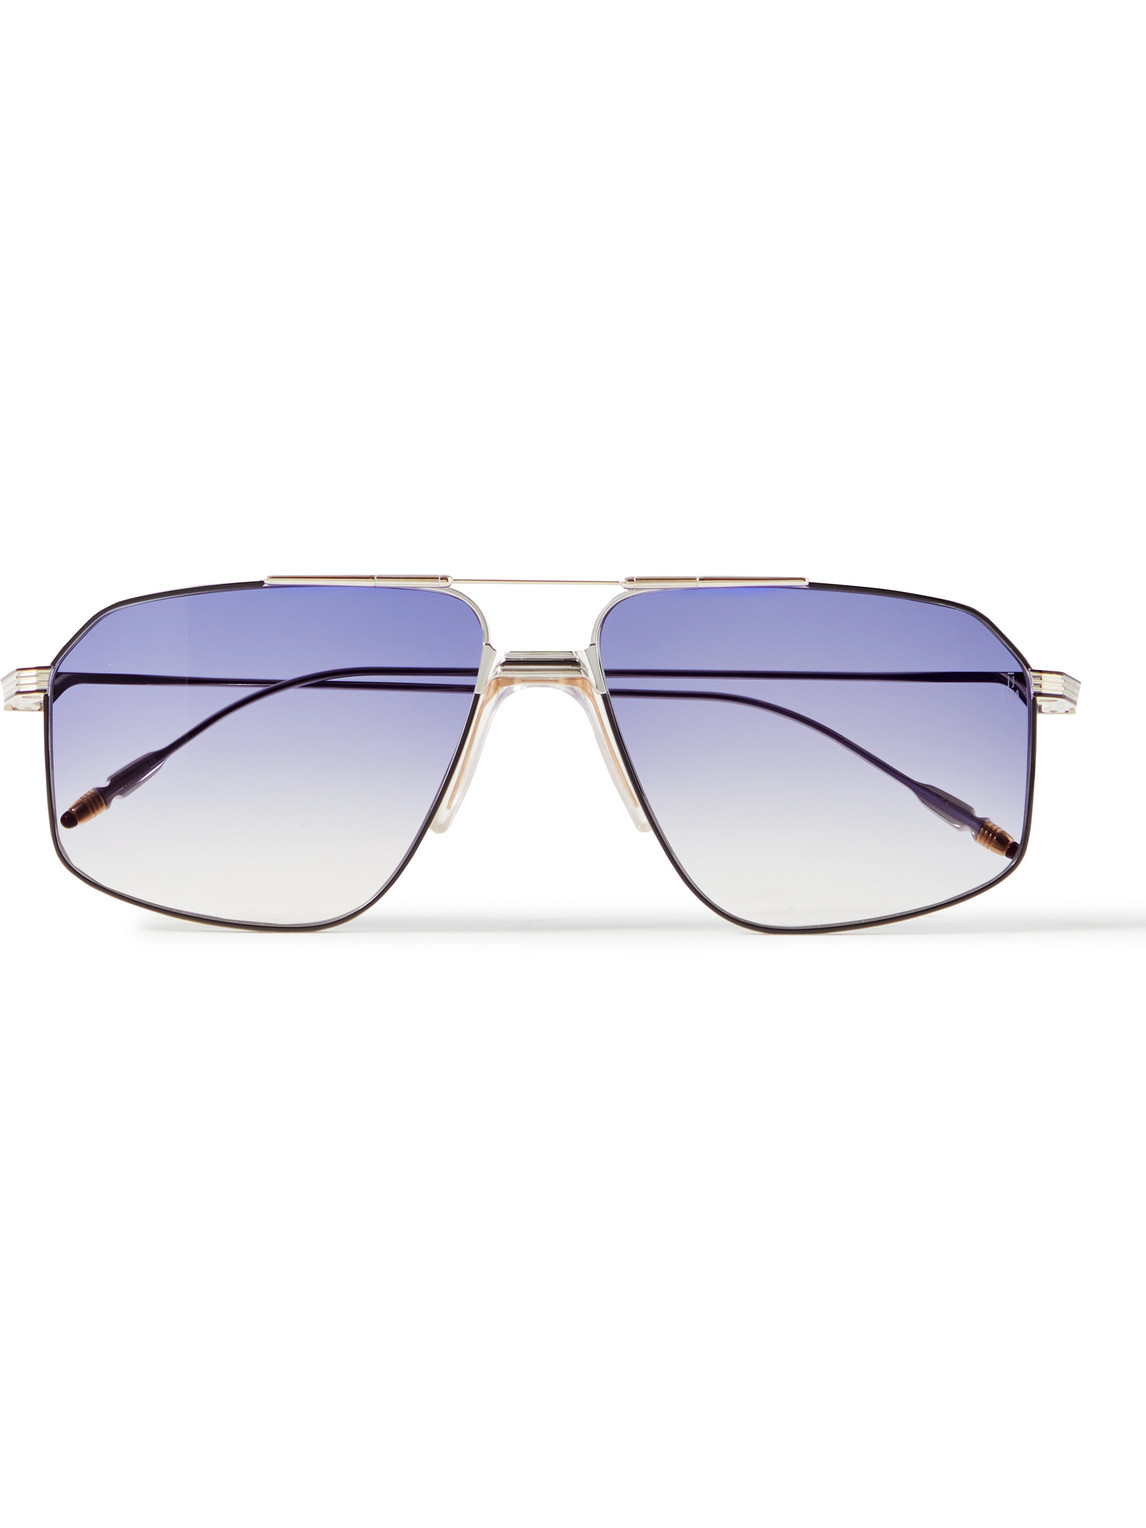 Jacques Marie Mage Jagger Aviator-style Silver-tone Sunglasses